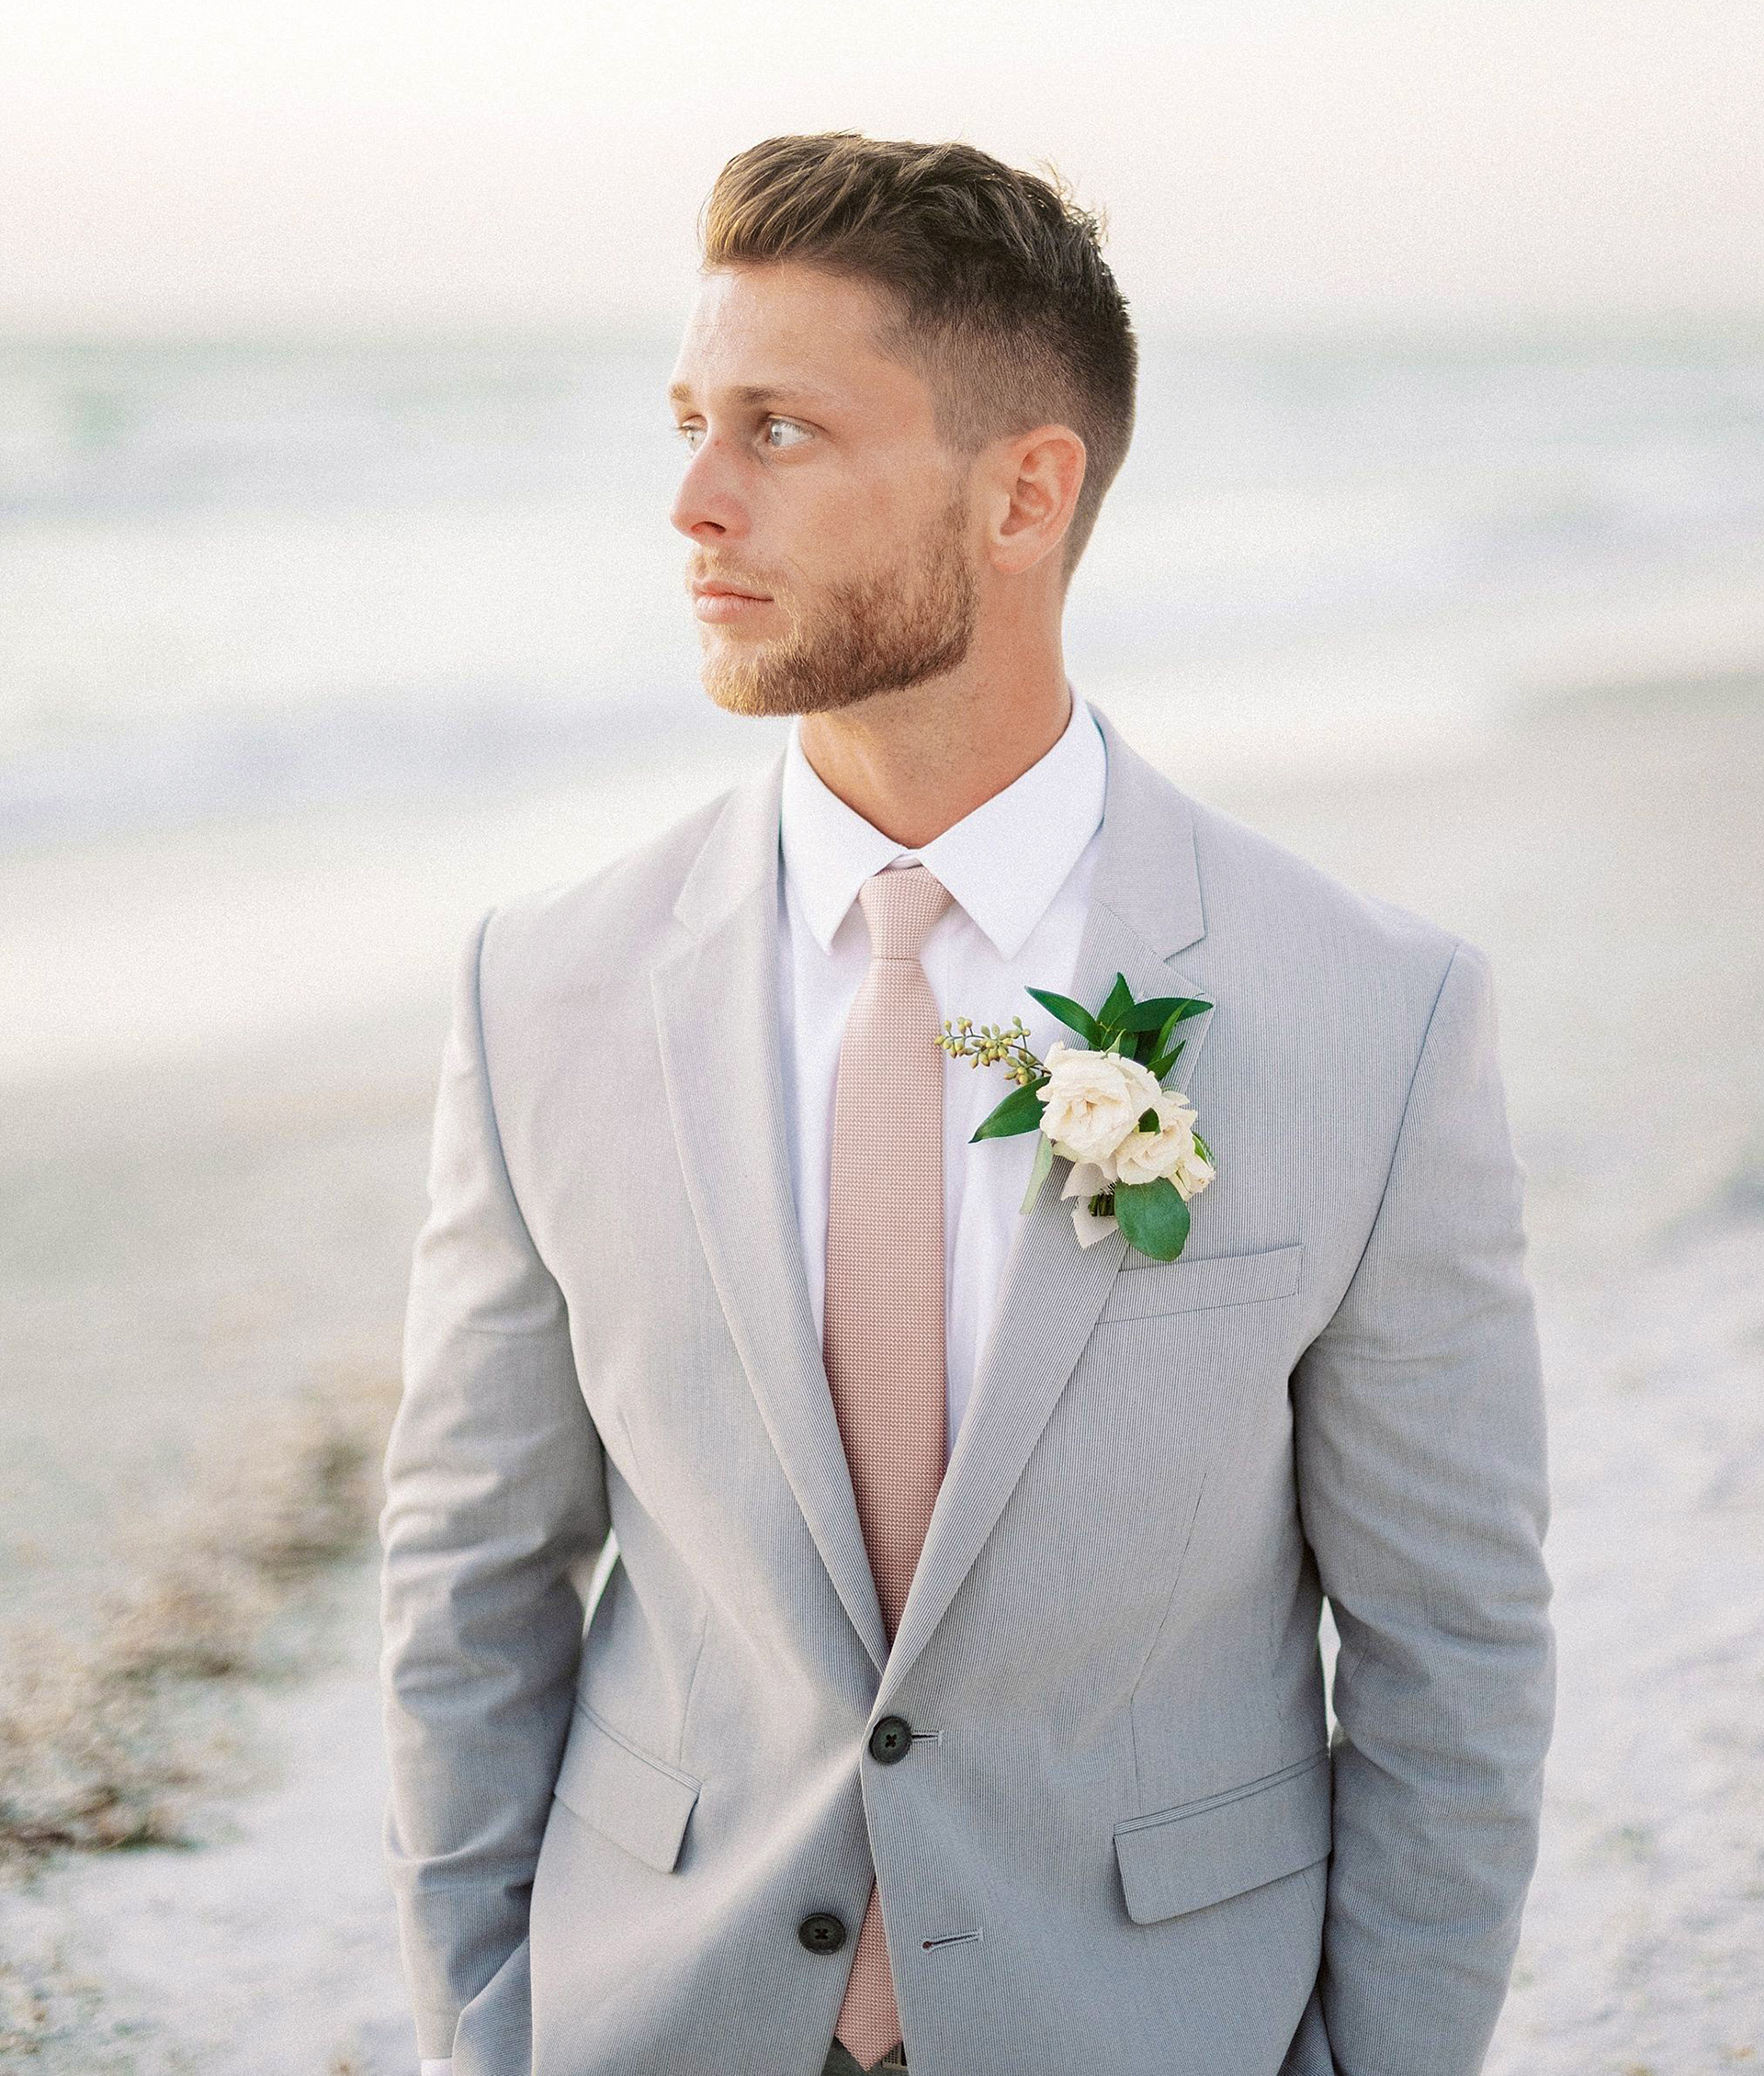 matching light grey suit with whtie shirt and light colored tie